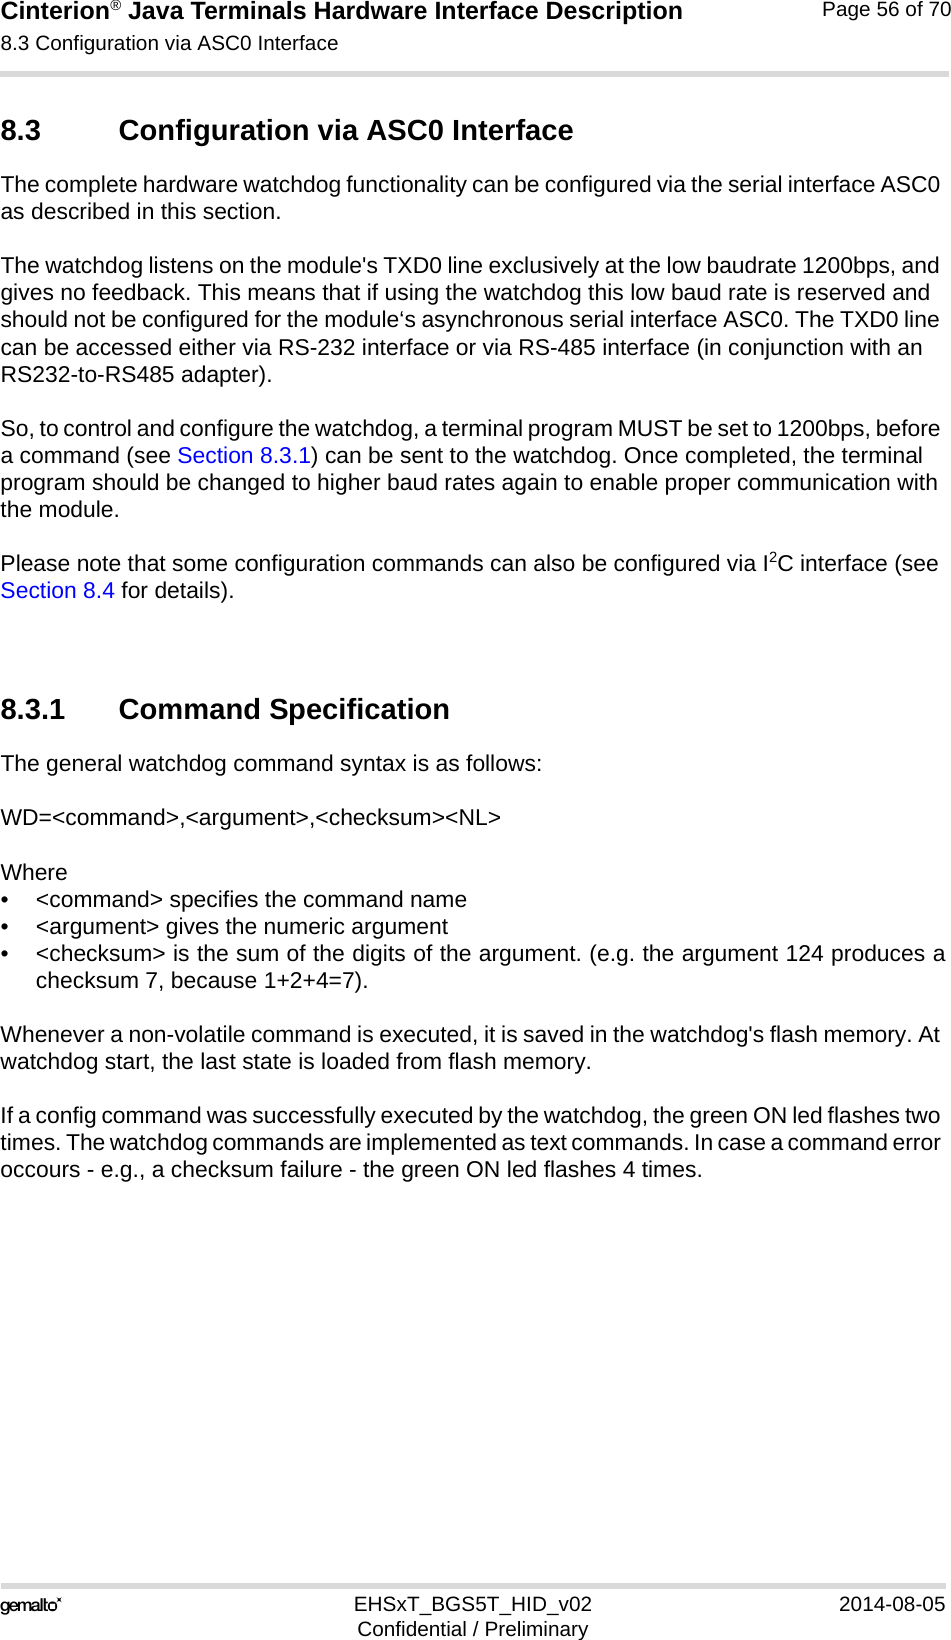 Cinterion® Java Terminals Hardware Interface Description8.3 Configuration via ASC0 Interface69EHSxT_BGS5T_HID_v02 2014-08-05Confidential / PreliminaryPage 56 of 708.3 Configuration via ASC0 InterfaceThe complete hardware watchdog functionality can be configured via the serial interface ASC0 as described in this section. The watchdog listens on the module&apos;s TXD0 line exclusively at the low baudrate 1200bps, and gives no feedback. This means that if using the watchdog this low baud rate is reserved and should not be configured for the module‘s asynchronous serial interface ASC0. The TXD0 line can be accessed either via RS-232 interface or via RS-485 interface (in conjunction with an RS232-to-RS485 adapter). So, to control and configure the watchdog, a terminal program MUST be set to 1200bps, before a command (see Section 8.3.1) can be sent to the watchdog. Once completed, the terminal program should be changed to higher baud rates again to enable proper communication with the module.Please note that some configuration commands can also be configured via I2C interface (see Section 8.4 for details).8.3.1 Command SpecificationThe general watchdog command syntax is as follows:WD=&lt;command&gt;,&lt;argument&gt;,&lt;checksum&gt;&lt;NL&gt;Where• &lt;command&gt; specifies the command name• &lt;argument&gt; gives the numeric argument• &lt;checksum&gt; is the sum of the digits of the argument. (e.g. the argument 124 produces achecksum 7, because 1+2+4=7).Whenever a non-volatile command is executed, it is saved in the watchdog&apos;s flash memory. At watchdog start, the last state is loaded from flash memory.If a config command was successfully executed by the watchdog, the green ON led flashes two times. The watchdog commands are implemented as text commands. In case a command error occours - e.g., a checksum failure - the green ON led flashes 4 times.